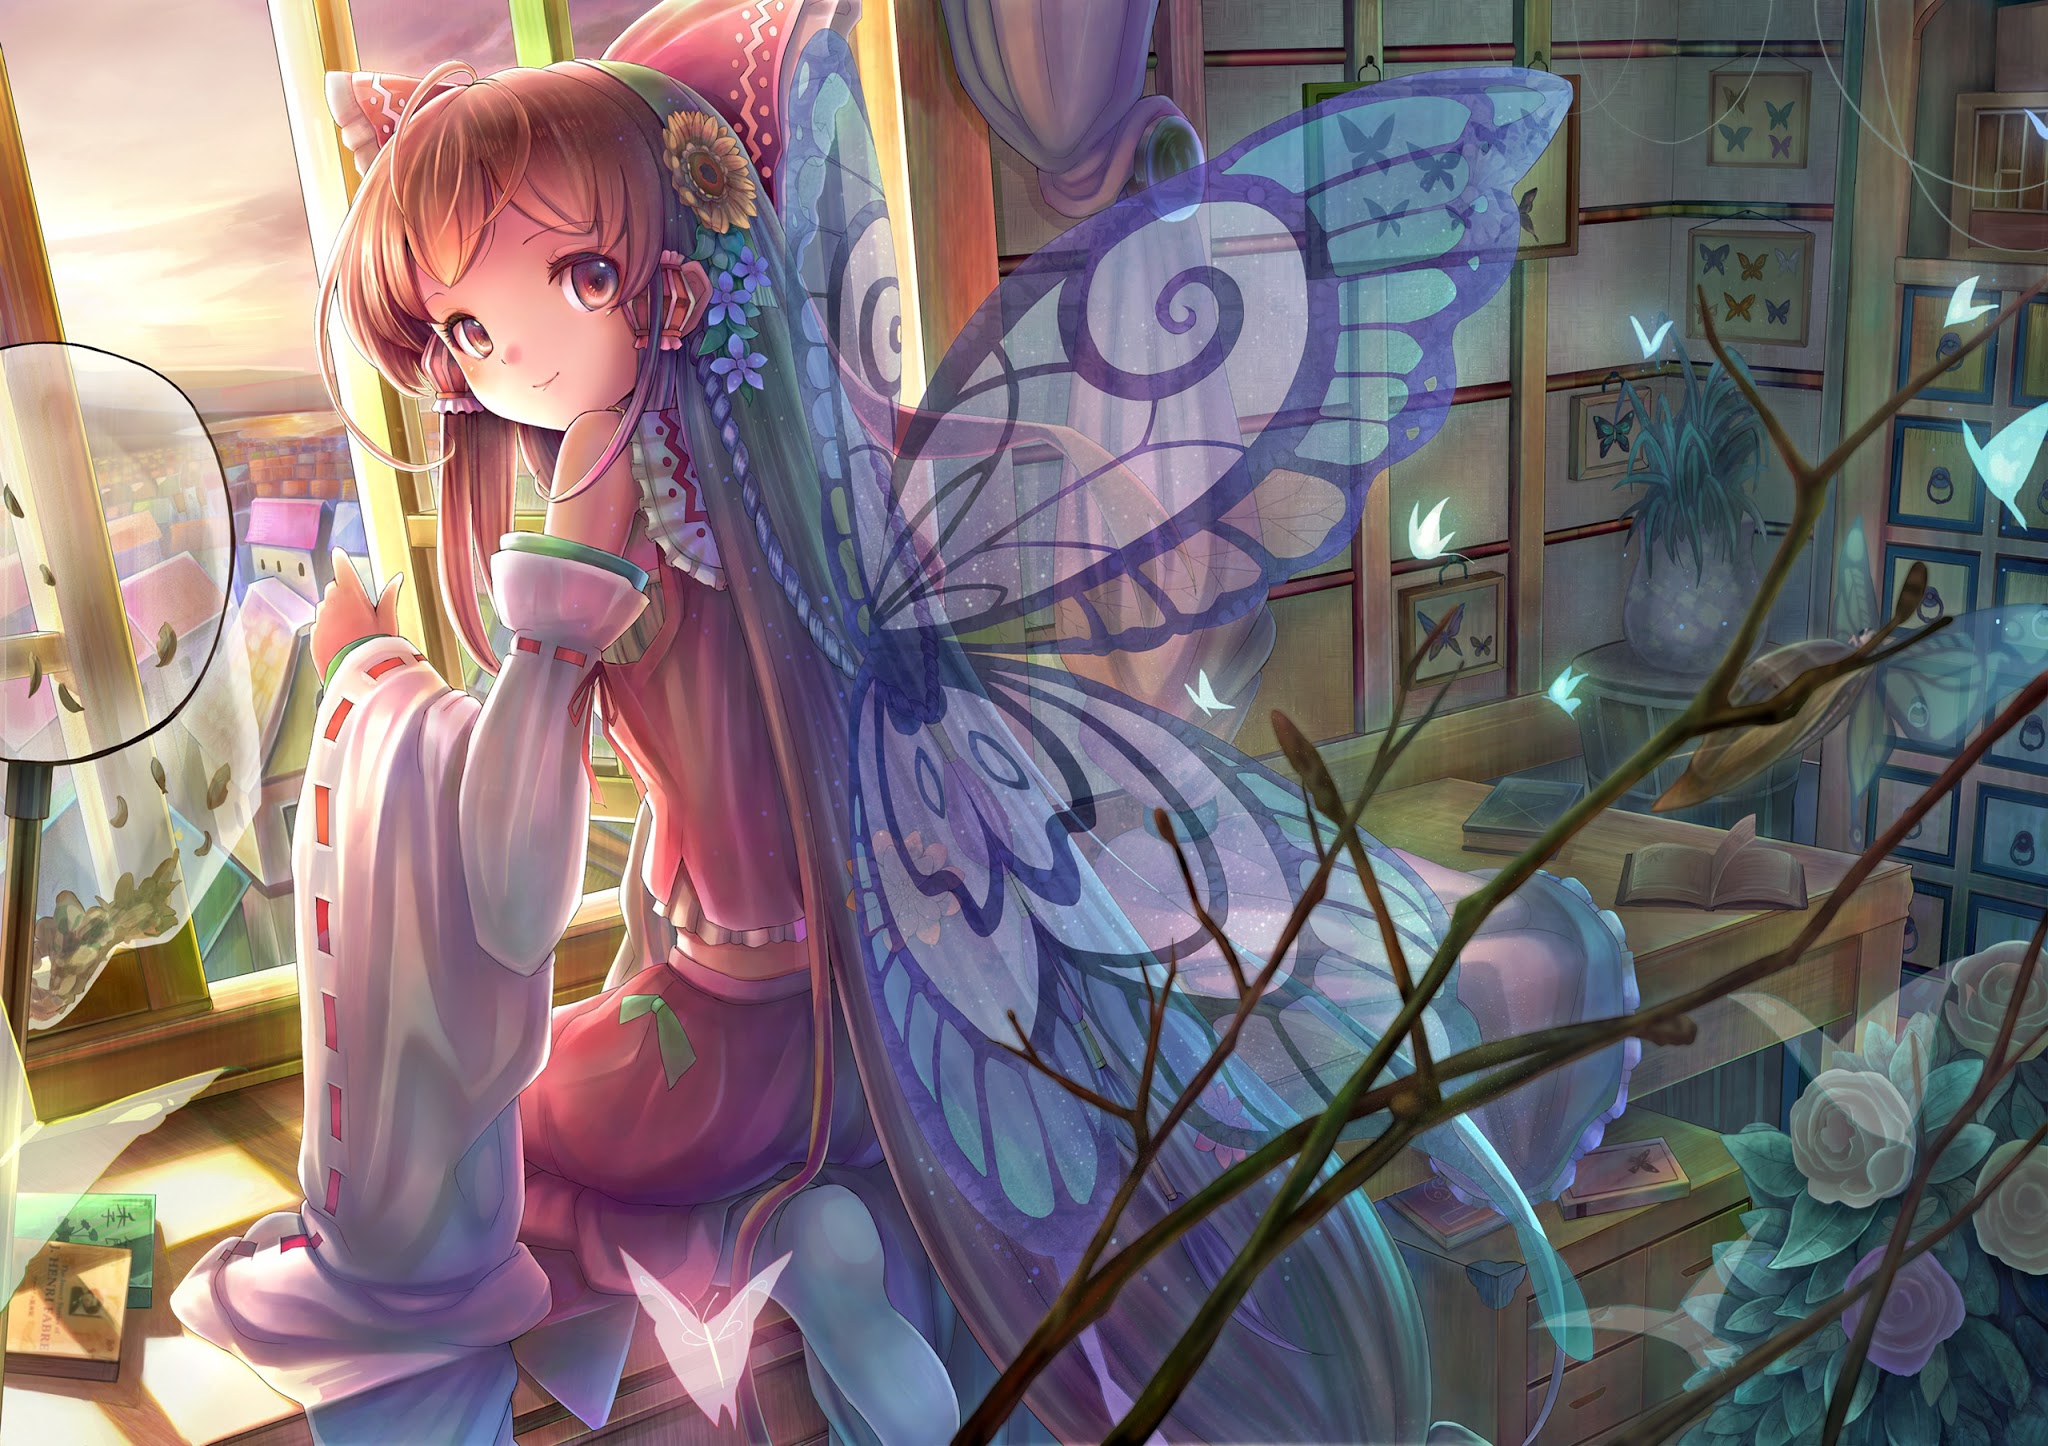 Cute+Girl+Butterfly+Wings+Smiling+Anime+HD+Wallpaper+Background+Photo+Image+Picture.jpg